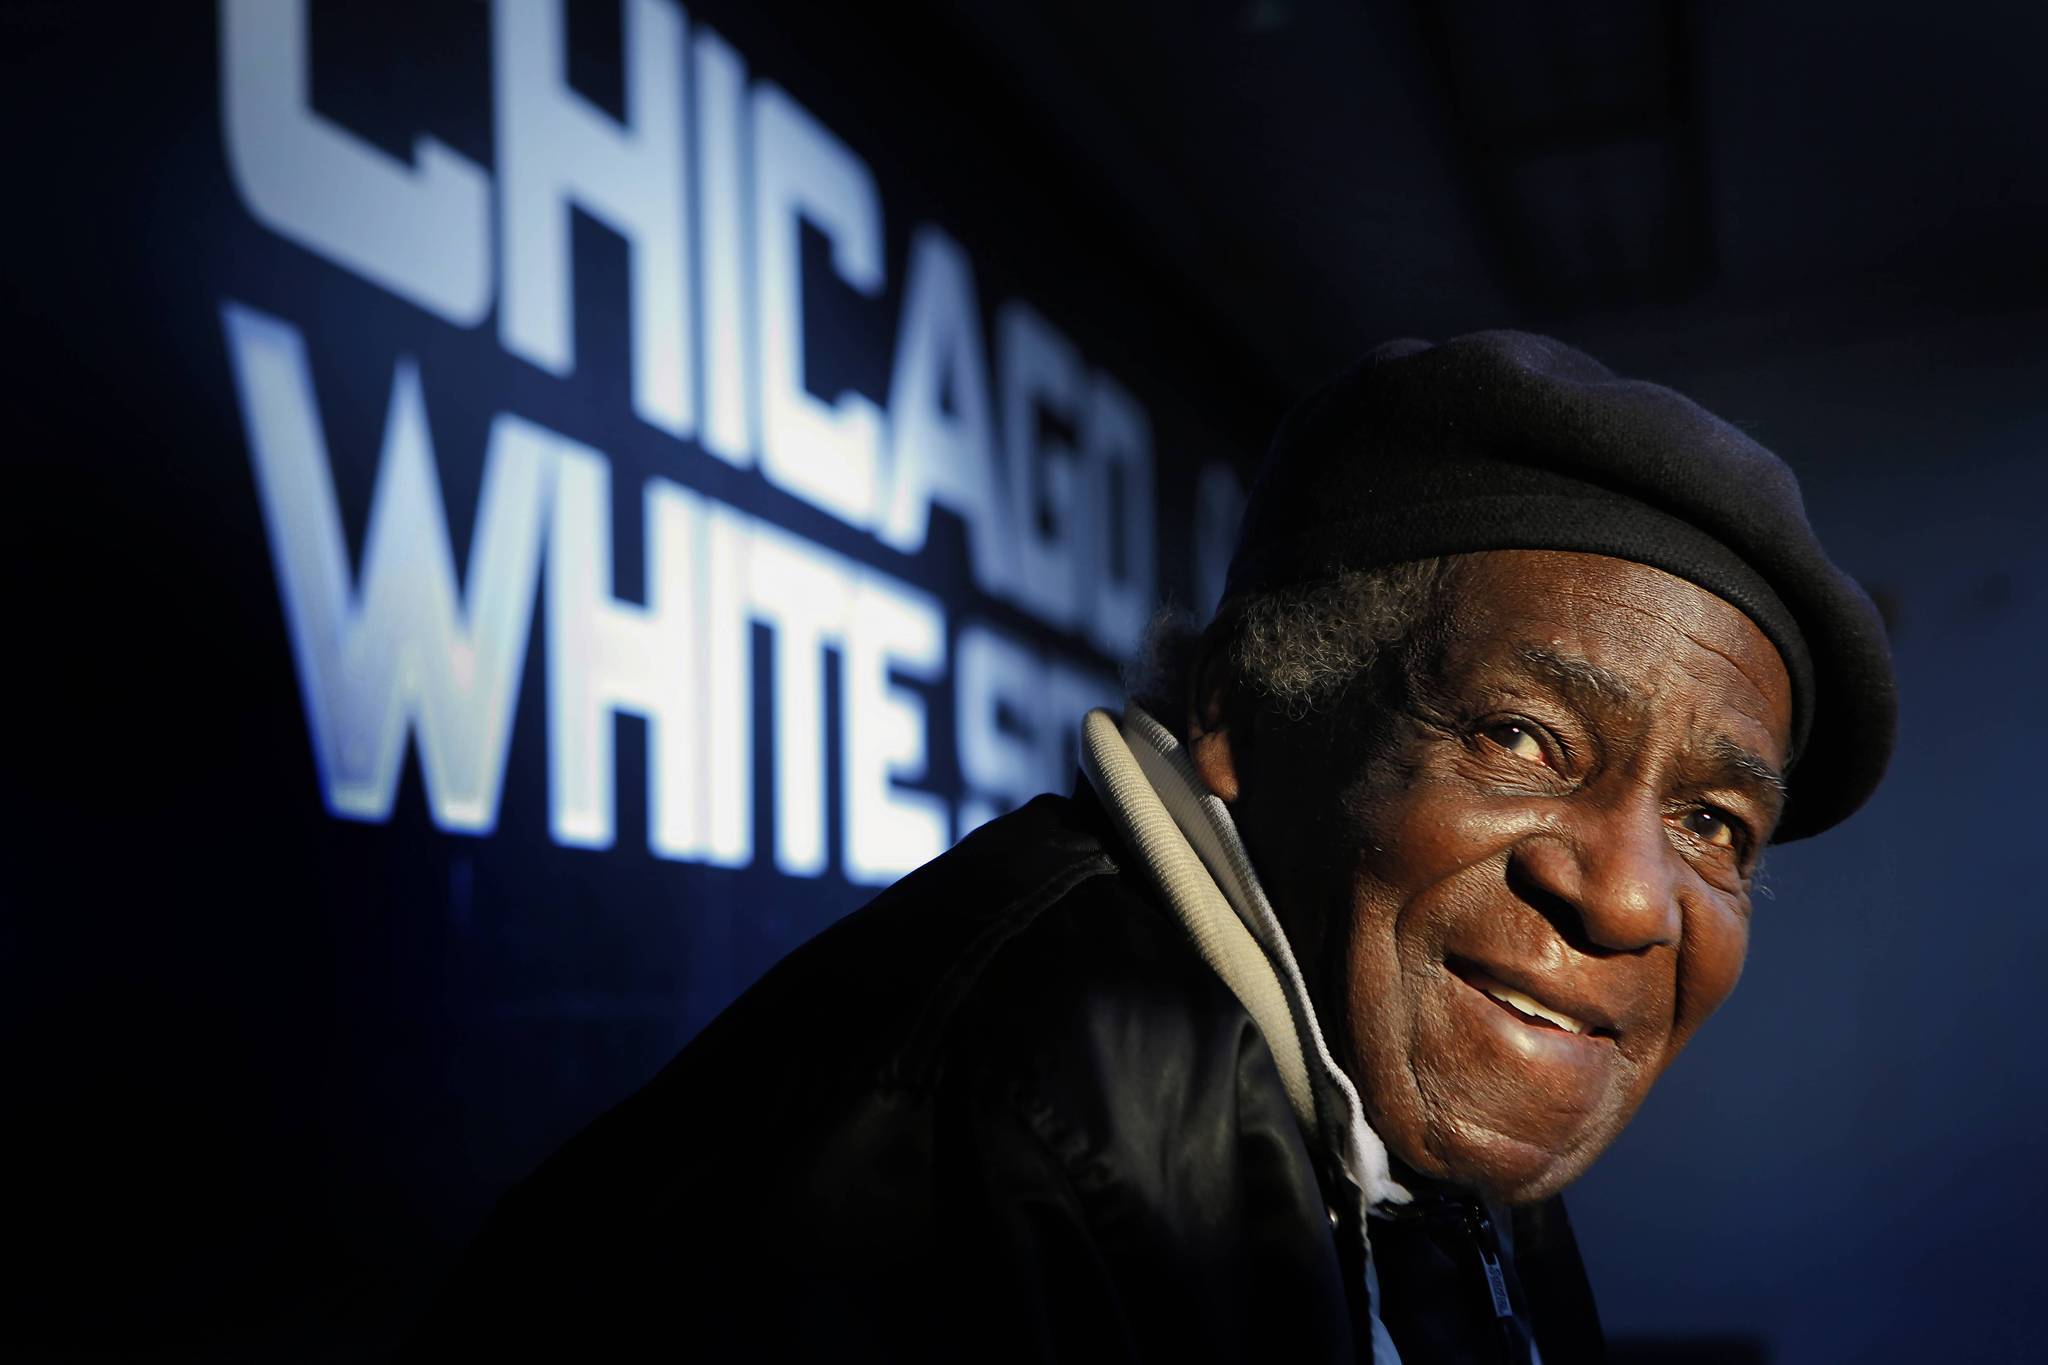 Cubs, White Sox To Honor Ernie Banks, Minnie Minoso With Throwback